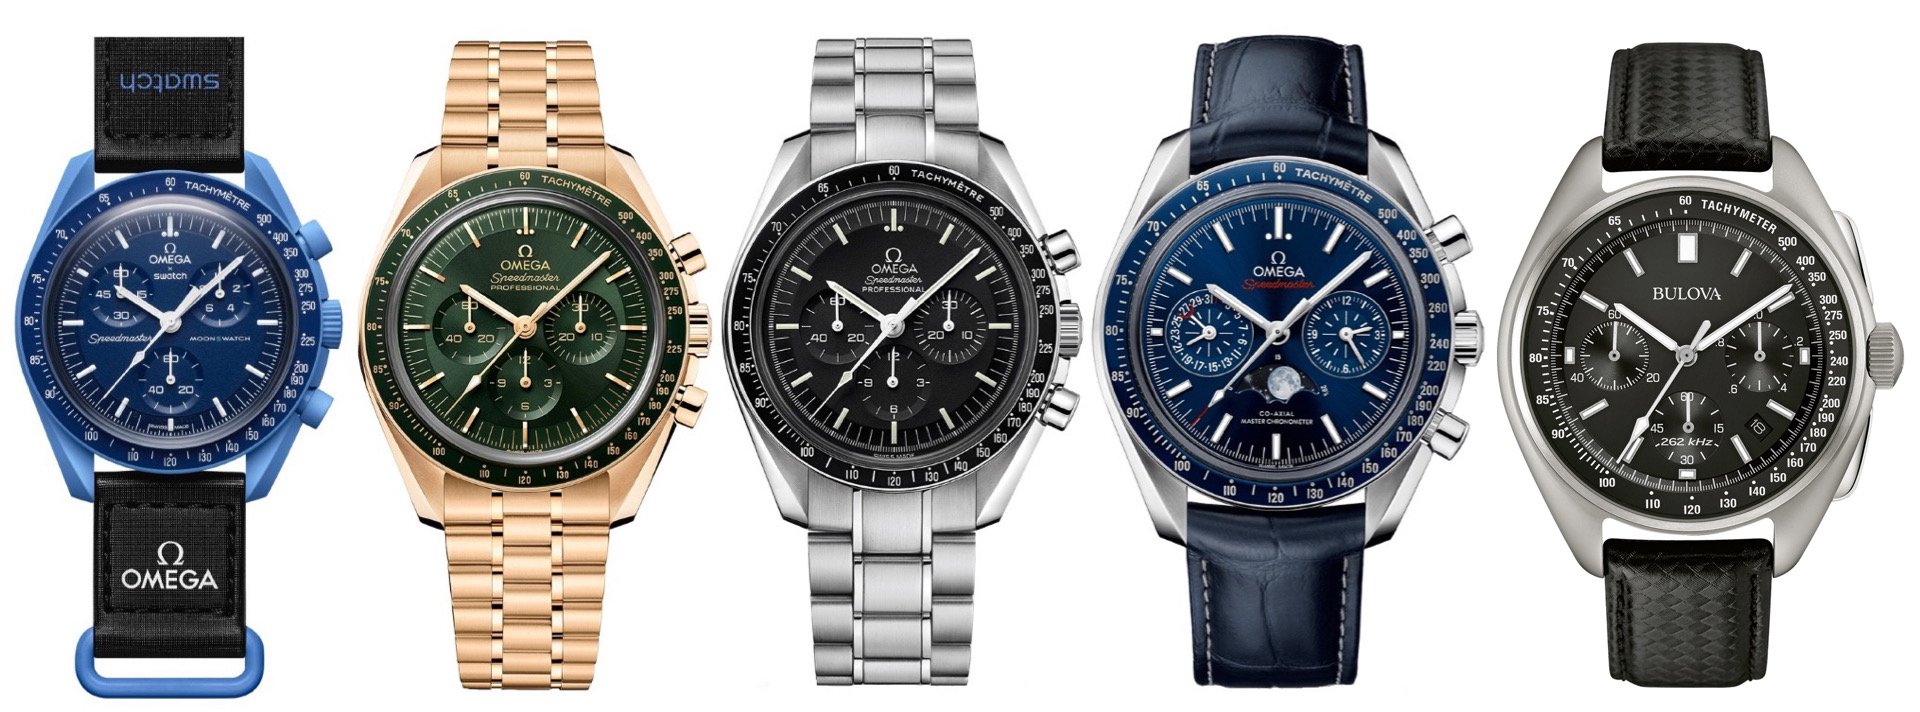 The 11 Best Moonwatches - Omega, Bulova and Even Swatch — Wrist Enthusiast